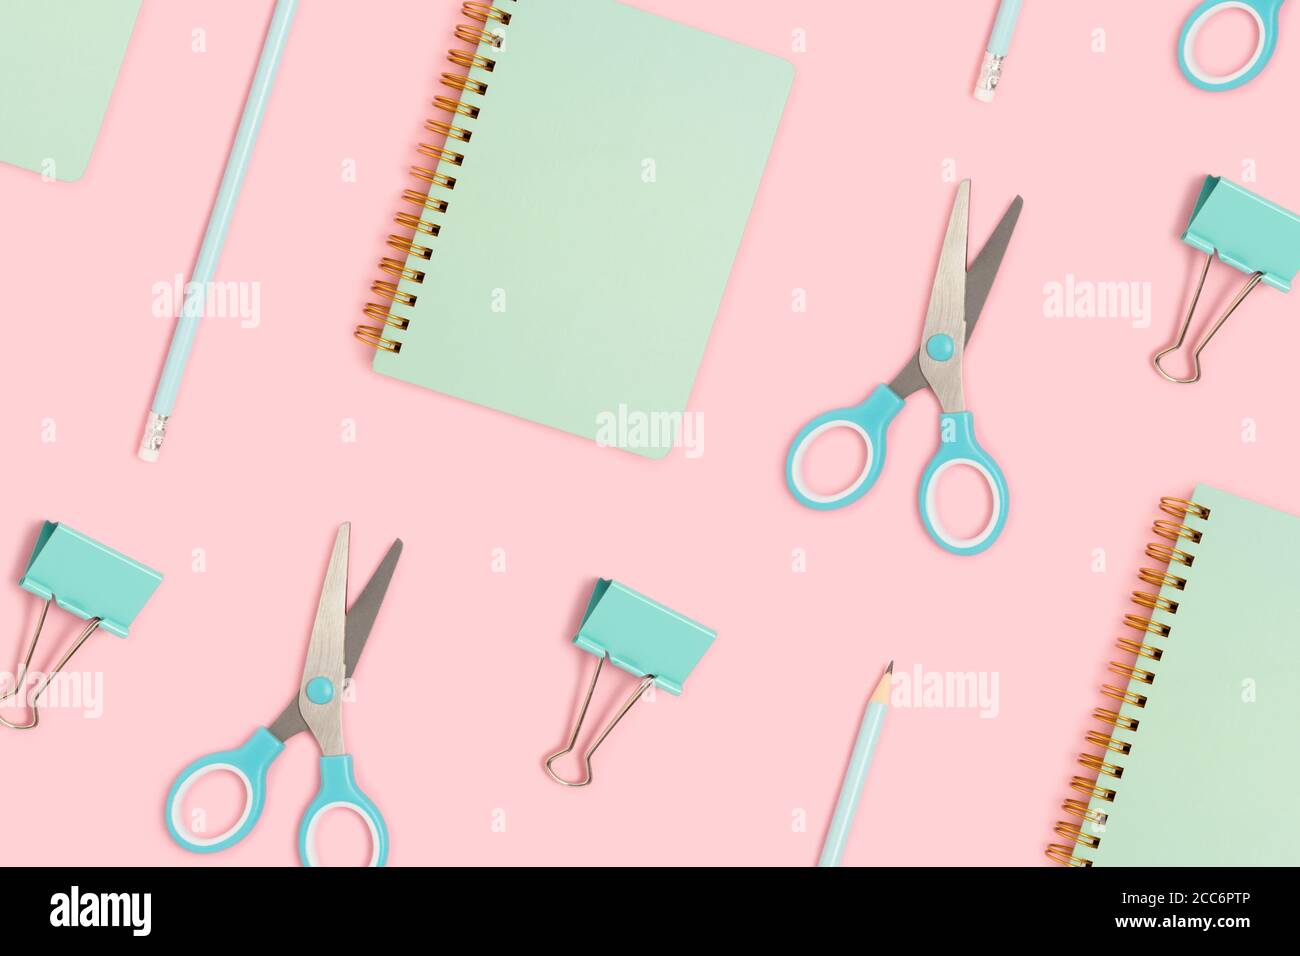 Cute school equipment pattern on a pink background. Office supplies layout  Stock Photo - Alamy